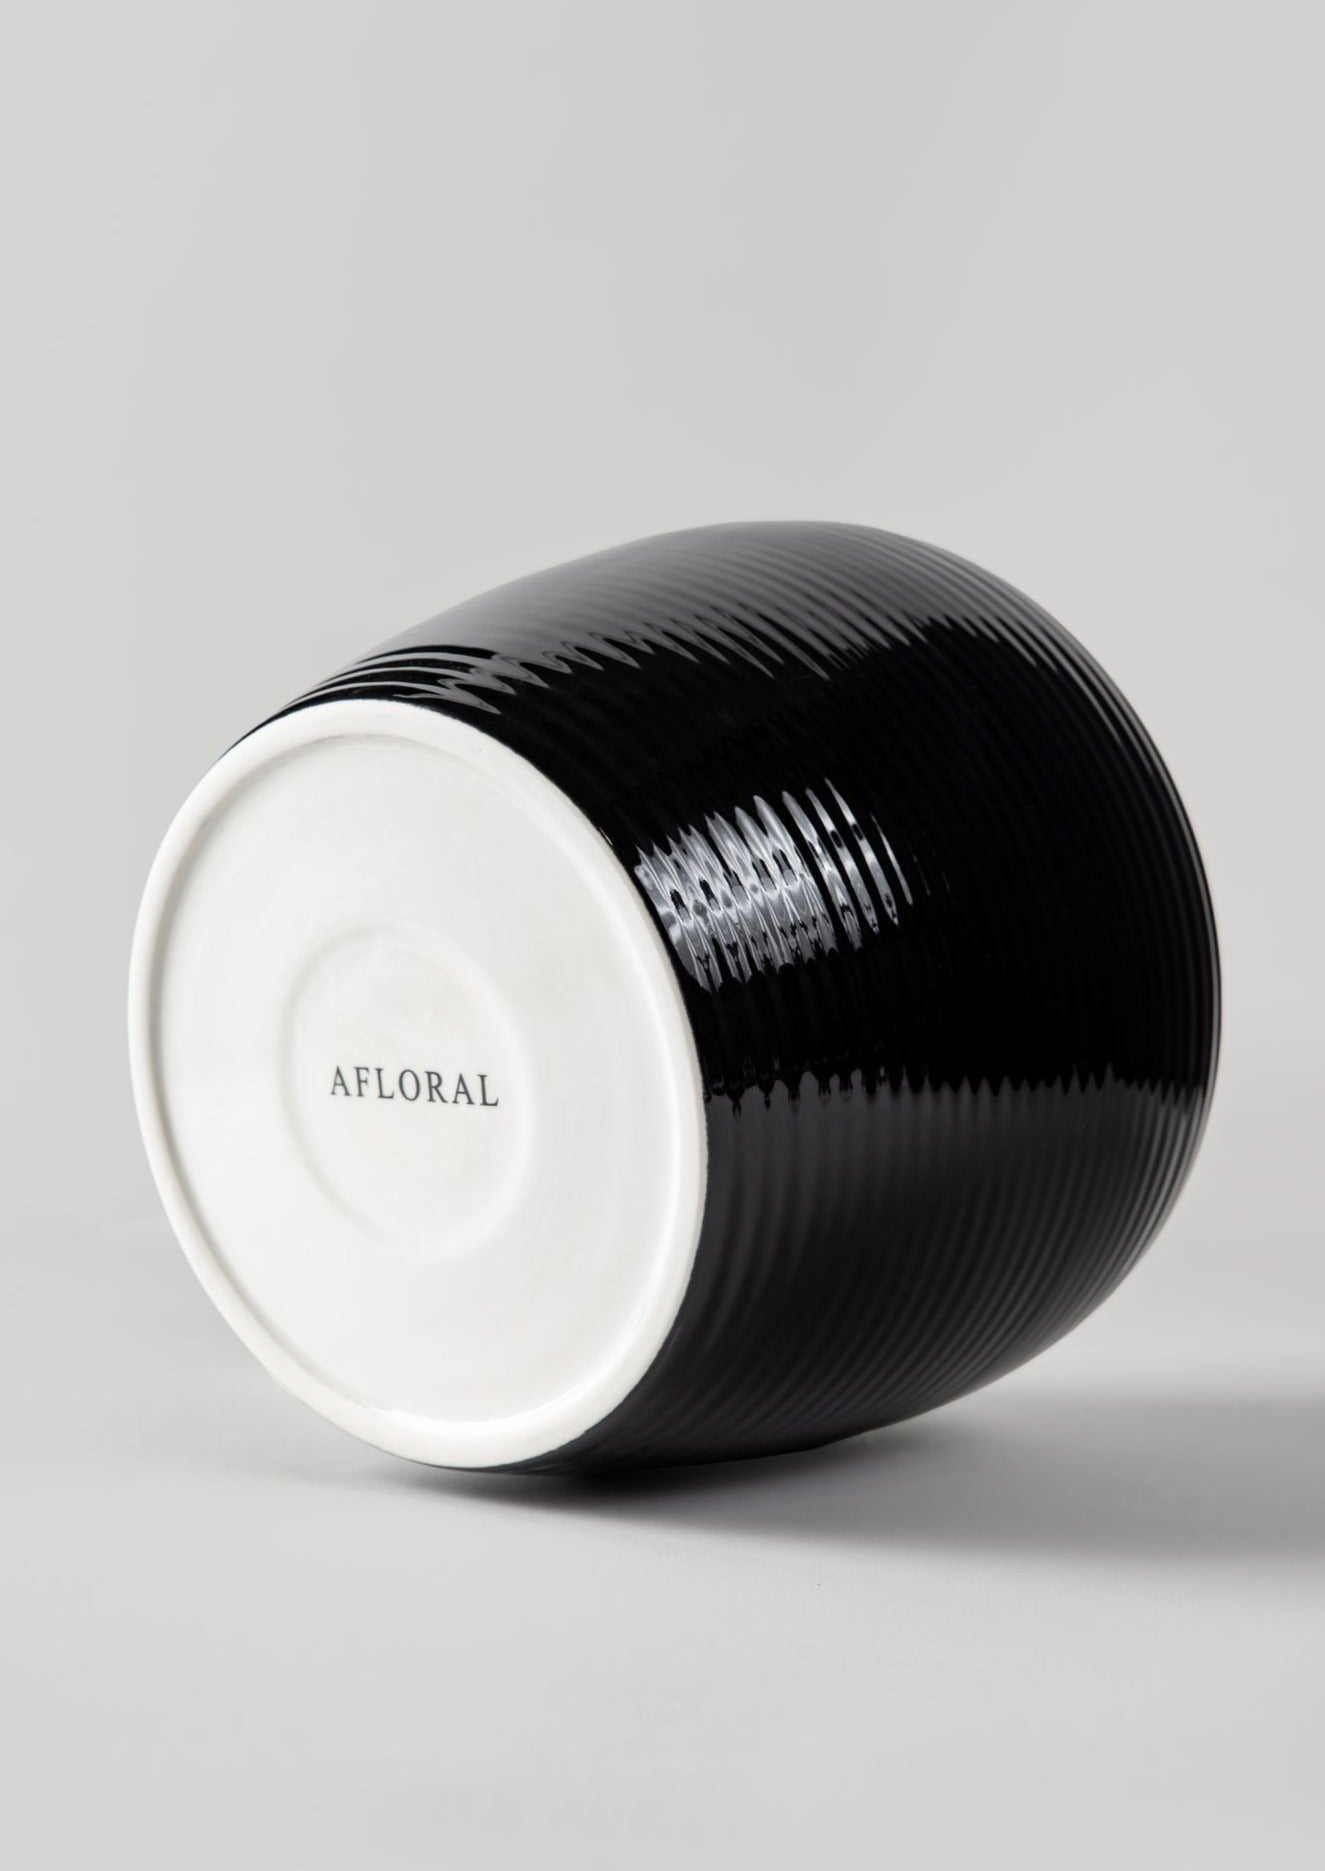 Bottom of the Ribbed Stoneware Vase in Noir Exclusive at Afloral